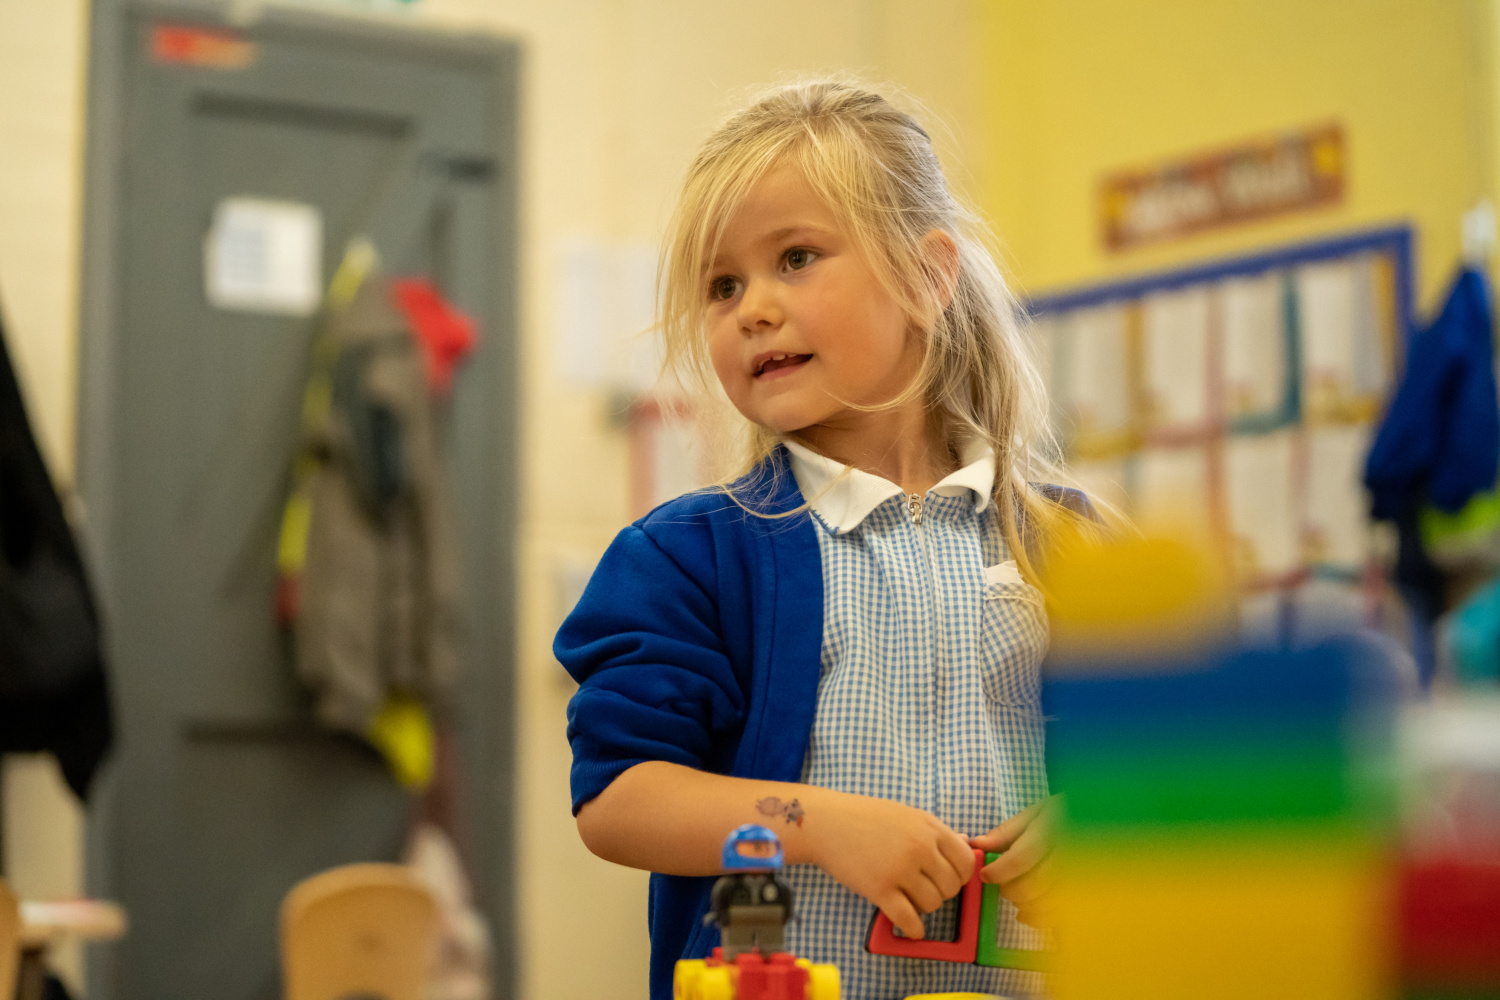 A young girl is seen wearing her academy uniform and playing with some LEGO in a classroom.